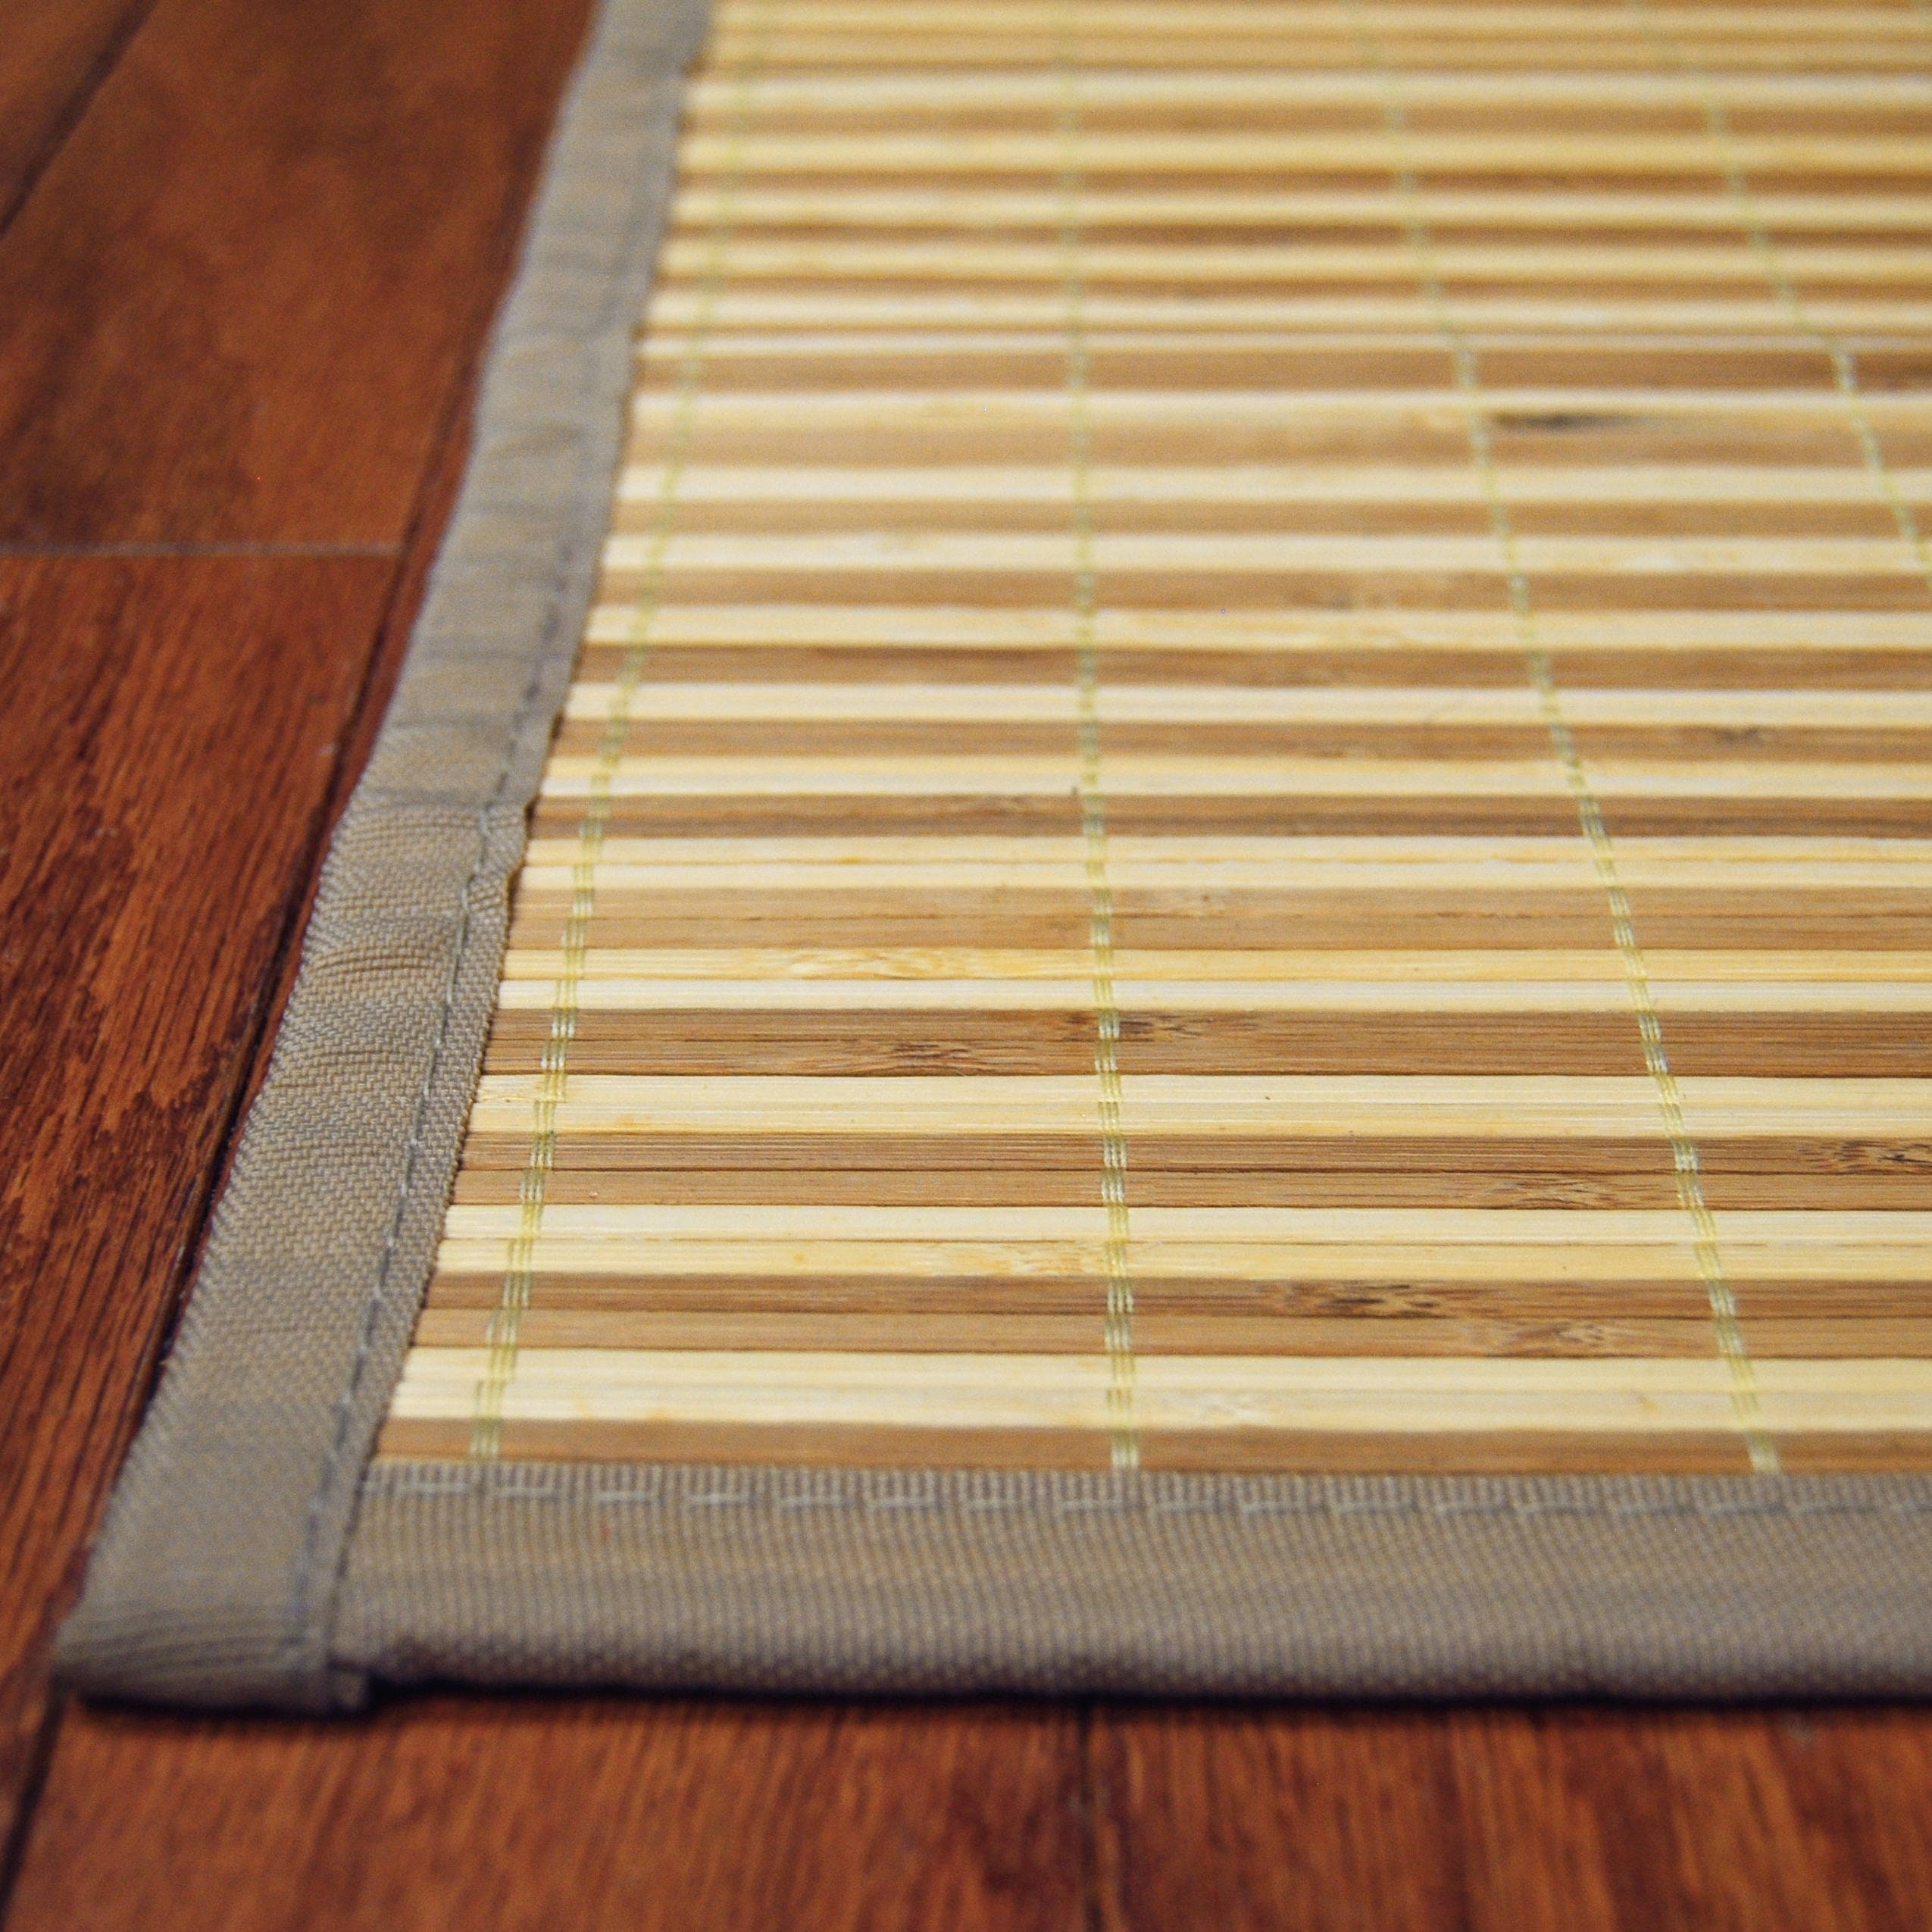 Rayon from Bamboo Bathroom Rugs and Bath Mats - Bed Bath & Beyond